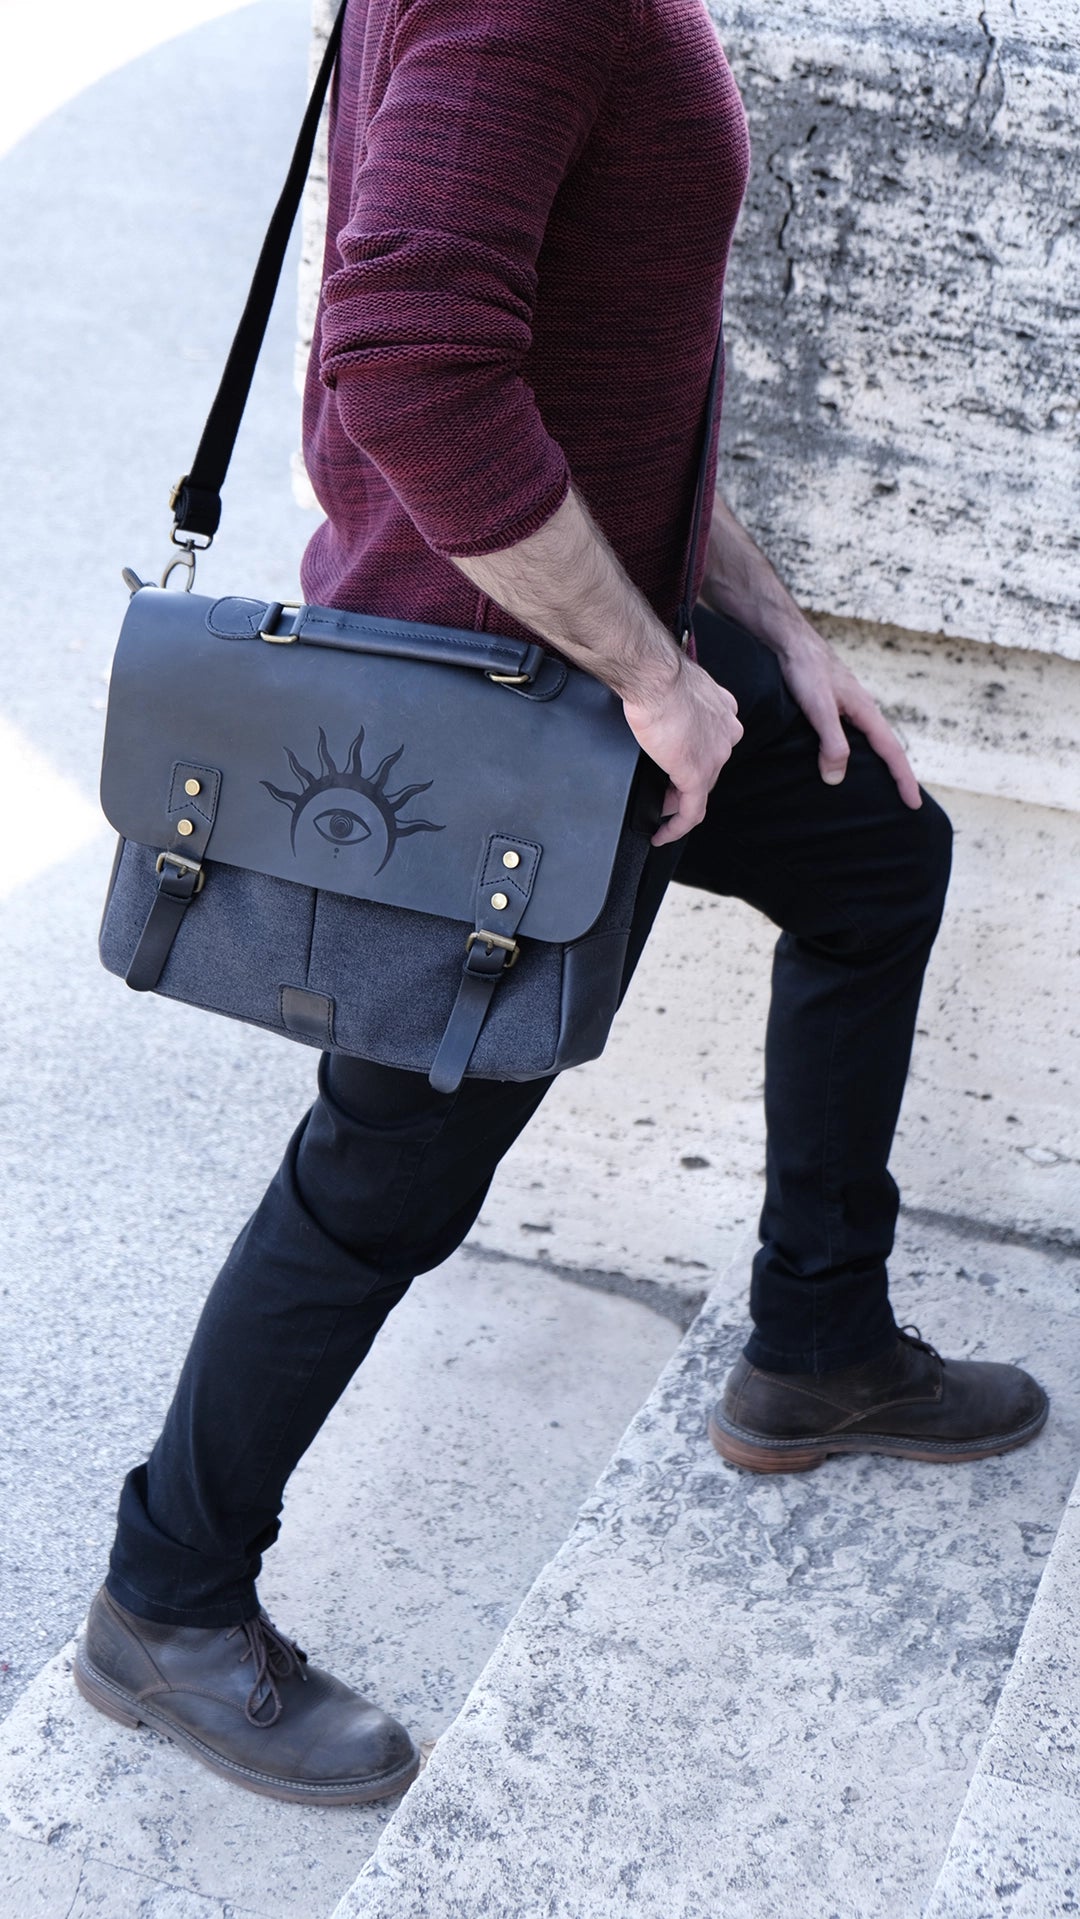 A model is wearing a black leather satchel engraved with a mystic eye with a solar crown. Dark academia style